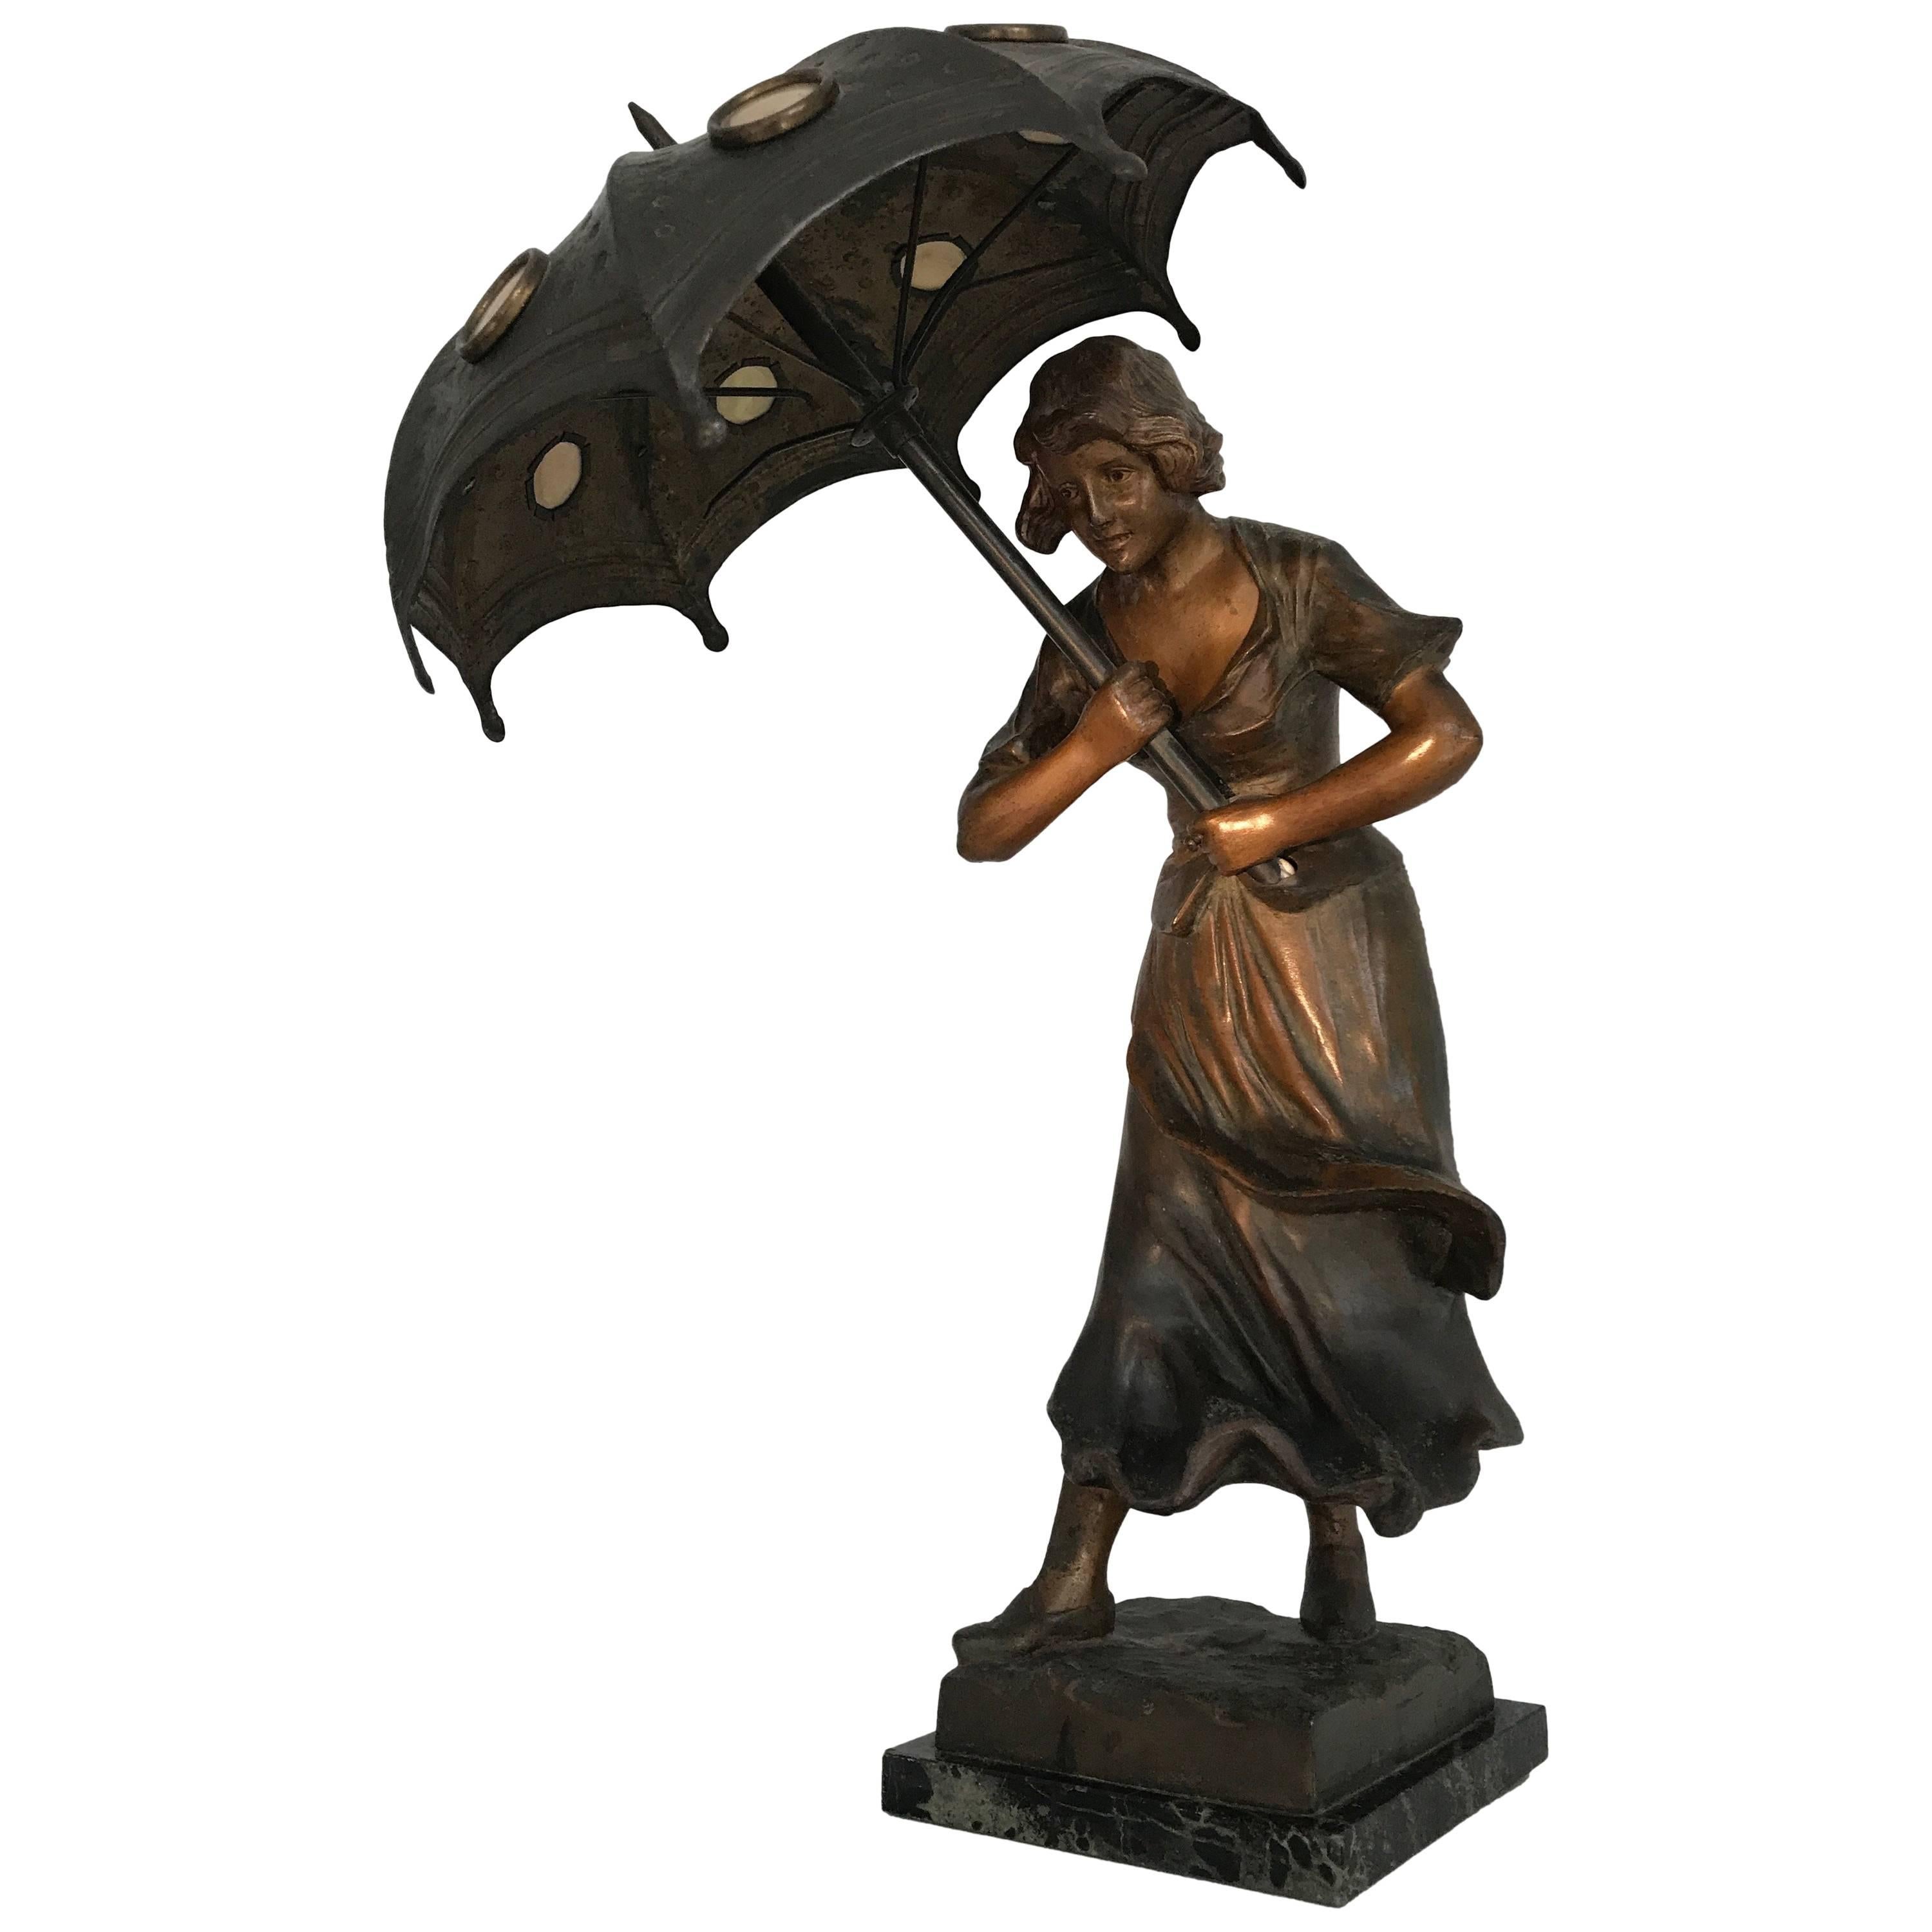 Stunning Art Deco Sculpture Desk or Table Lamp, Girl with Umbrella in the Wind